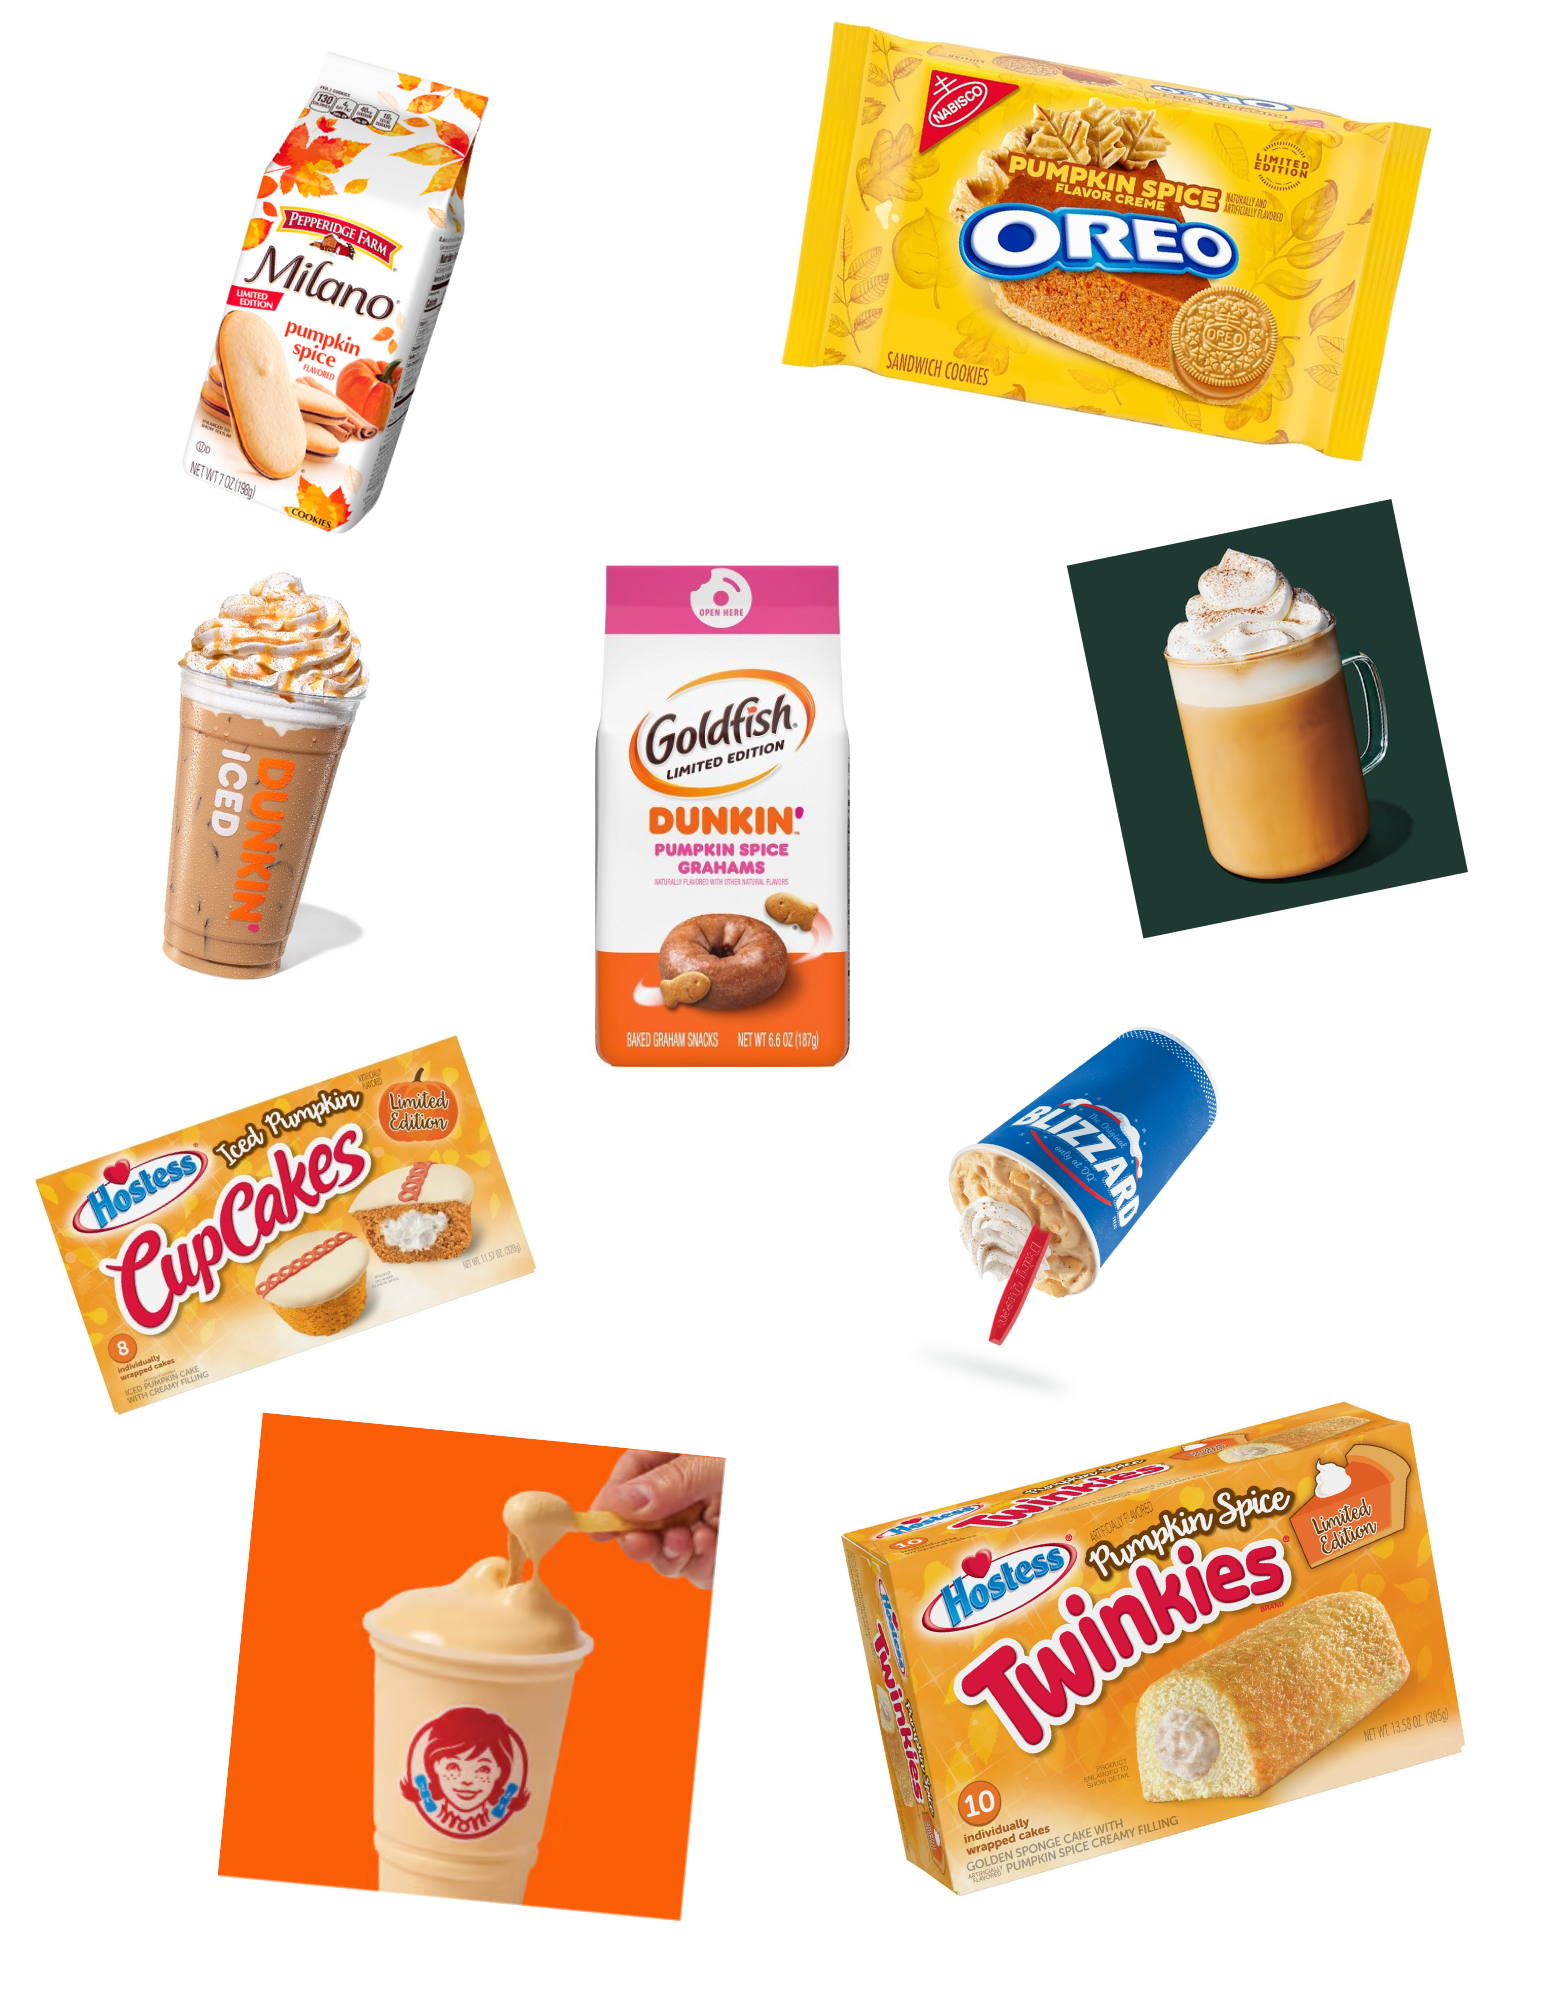 FALL MENU: Above are some fall items rated in this article. In order: Pepperidge Farms Milano Pumpkin Spice Cookies, Pumpkin Spice Oreos,  Pumpkin Spice Signature Latte from Dunkin Donuts, Dunkin Donuts Graham Goldfish, Starbucks Pumpkin Spice Latte, Hostess Pumpkin Spice Cupcakes,  Dairy Queen Pumpkin Pie Shake,  Pumpkin Spice Wendys Frosty, Hostess Pumpkin Spice Twinkies.